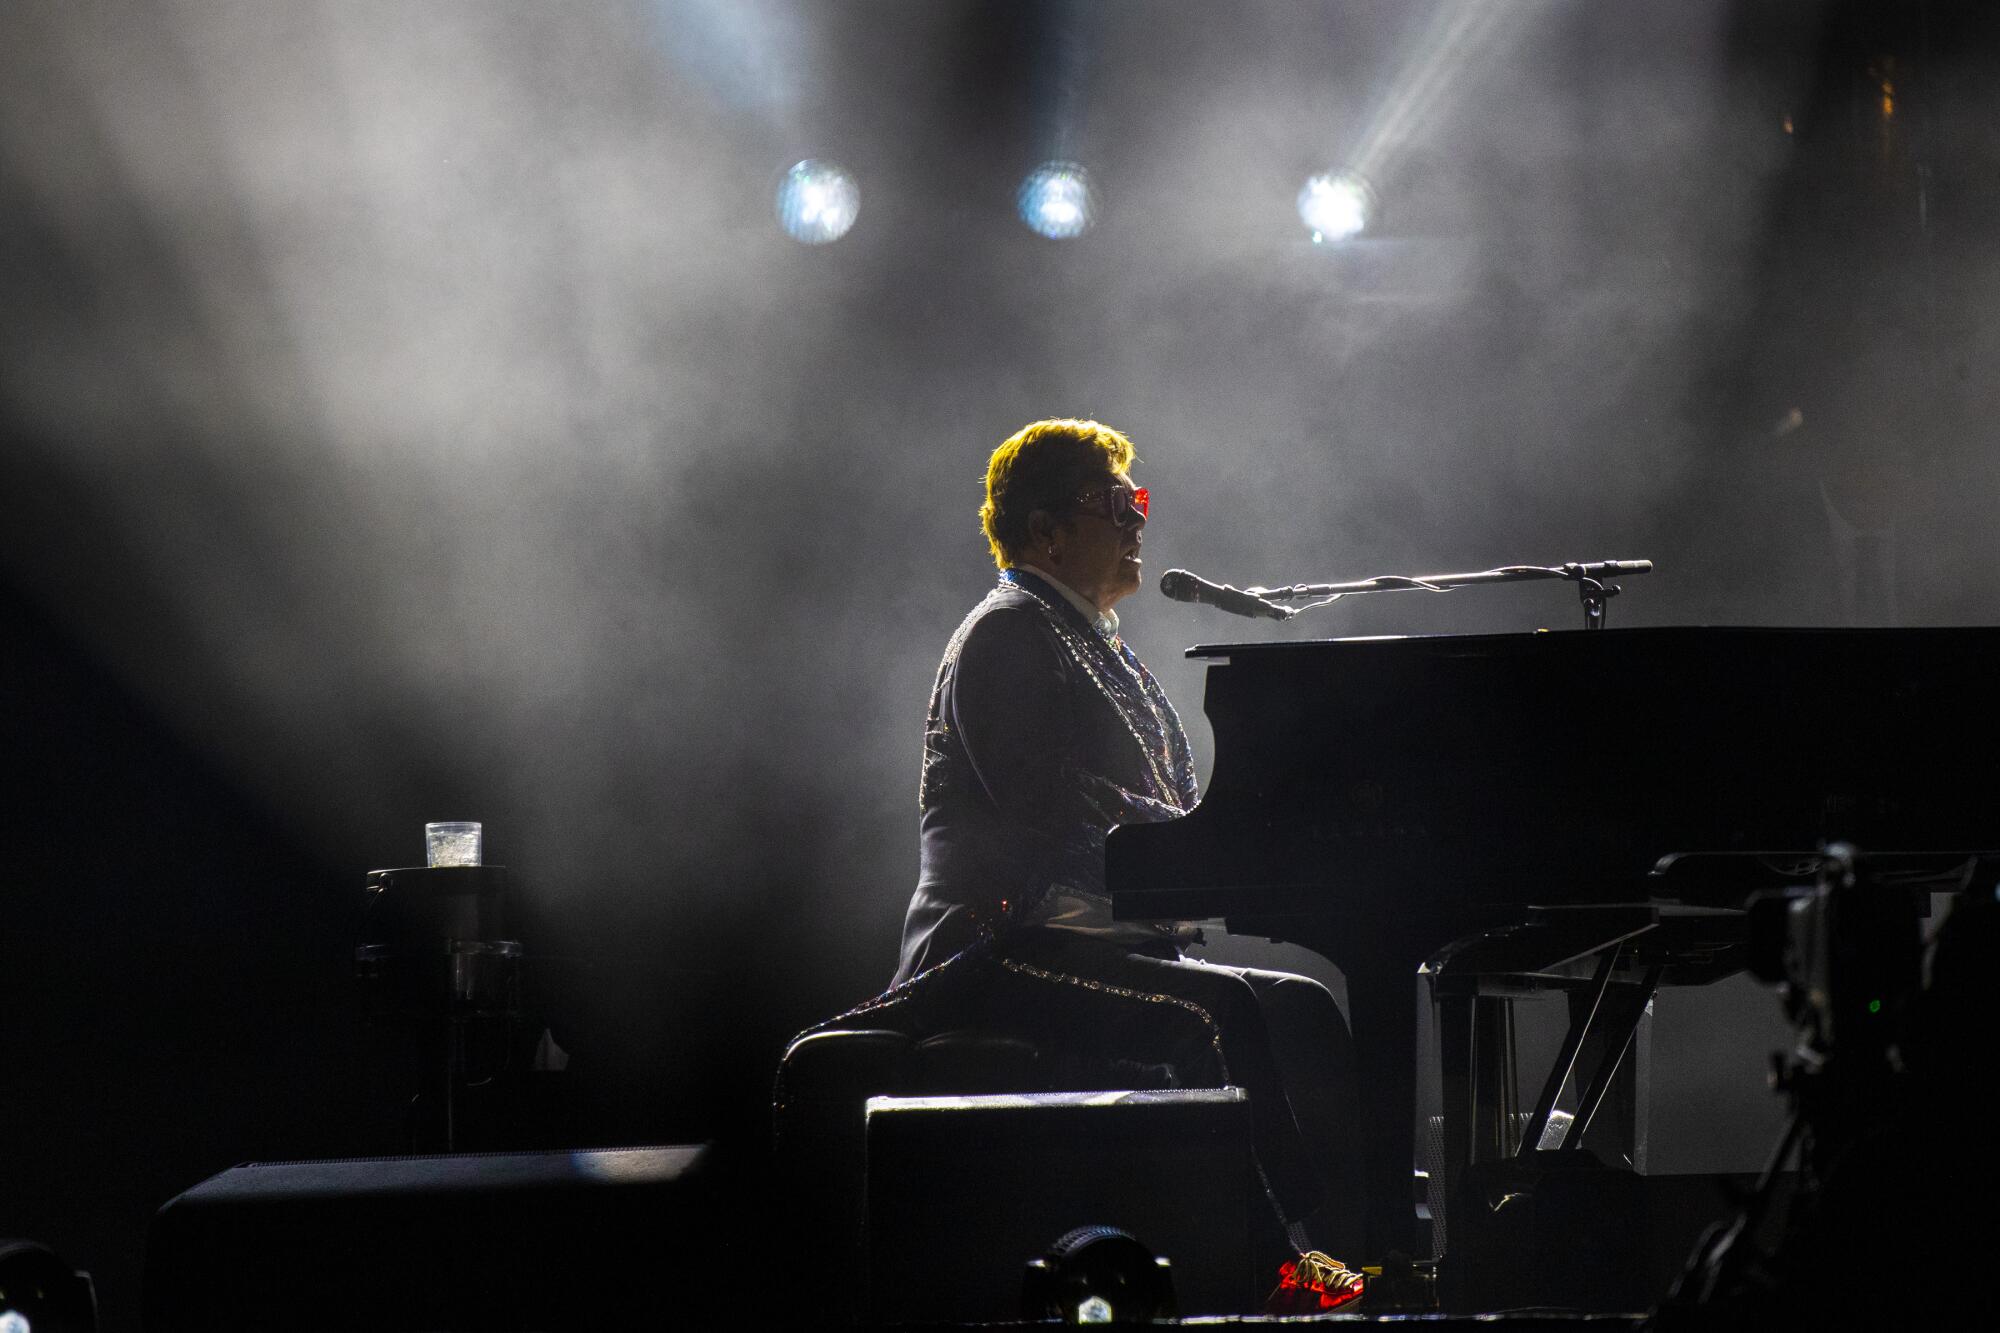 A foggy silhouette of a man playing piano and singing into a microphone on a stage